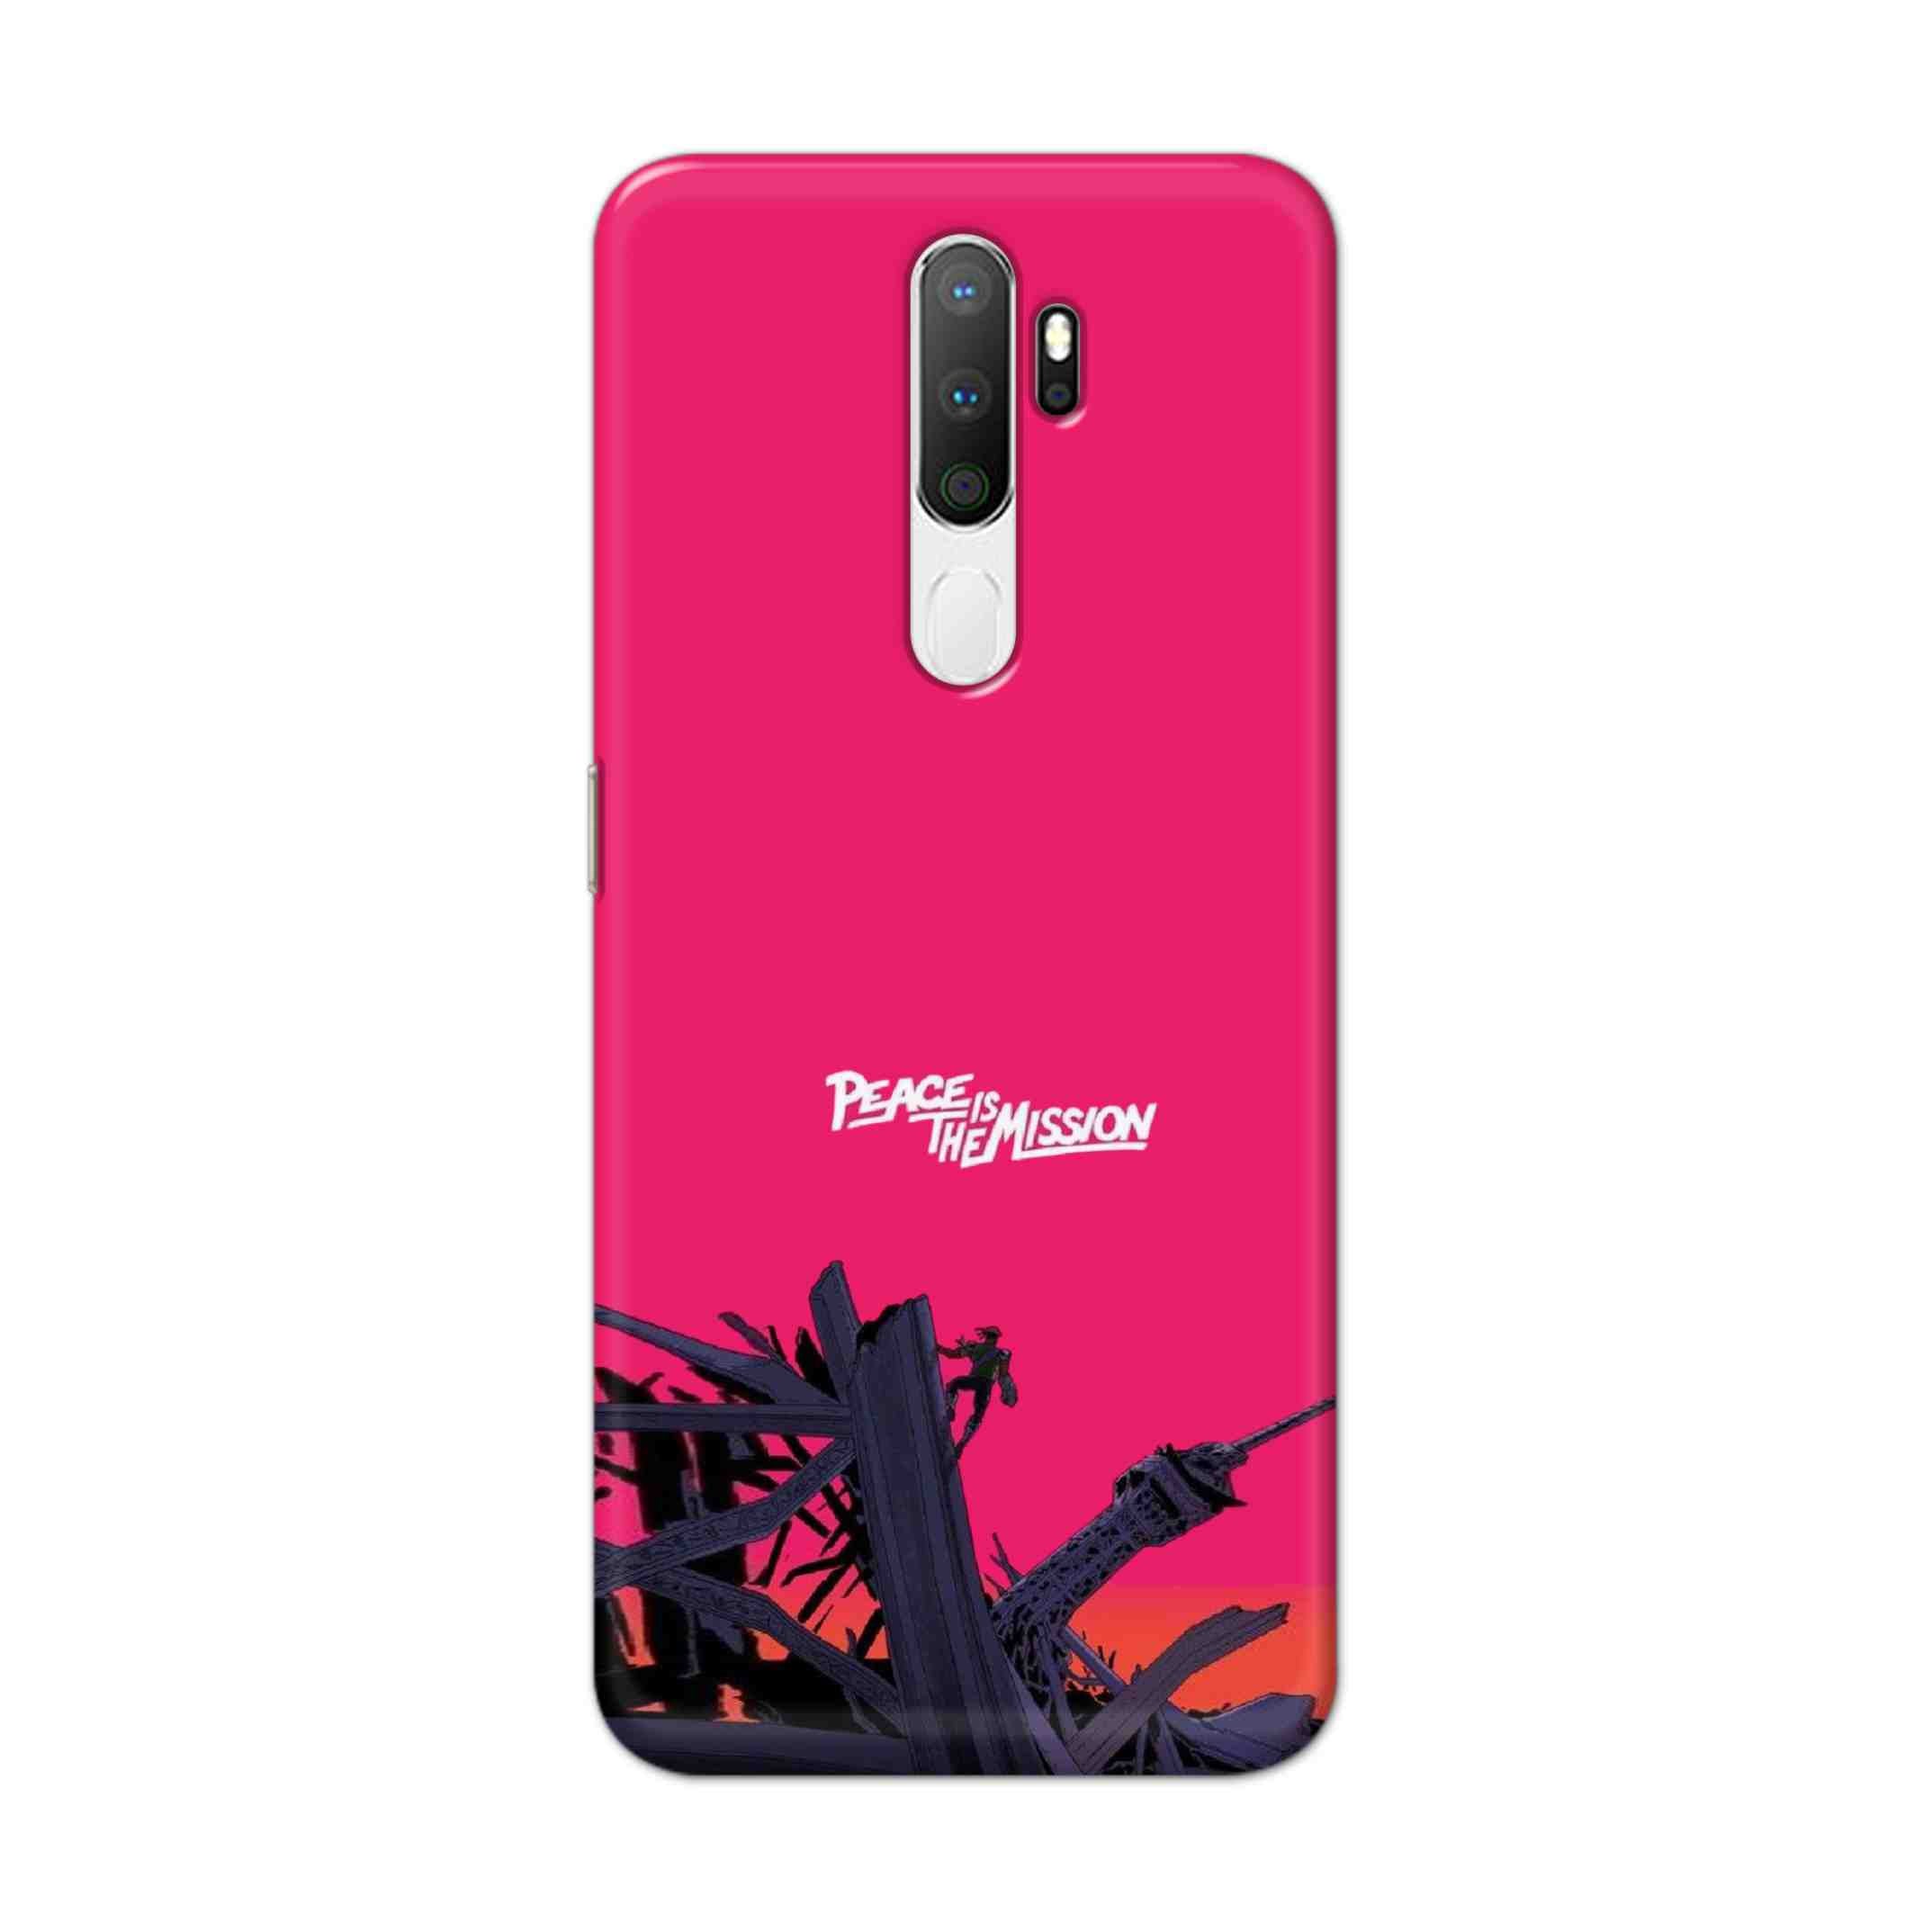 Buy Peace Is The Mission Hard Back Mobile Phone Case Cover For Oppo A5 (2020) Online